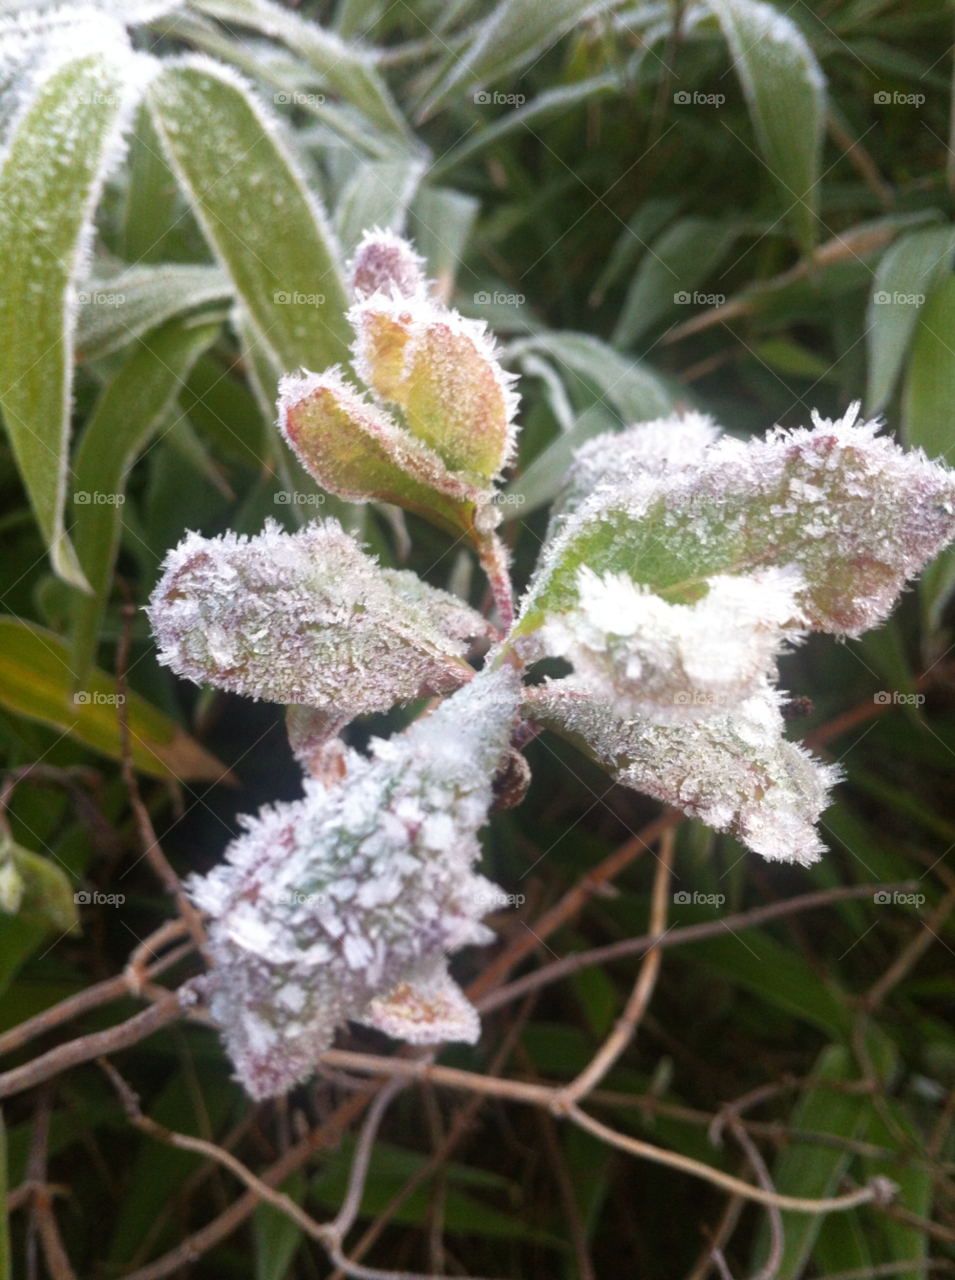 it very cold to day is ice on the leaf highlegh plants by chocho